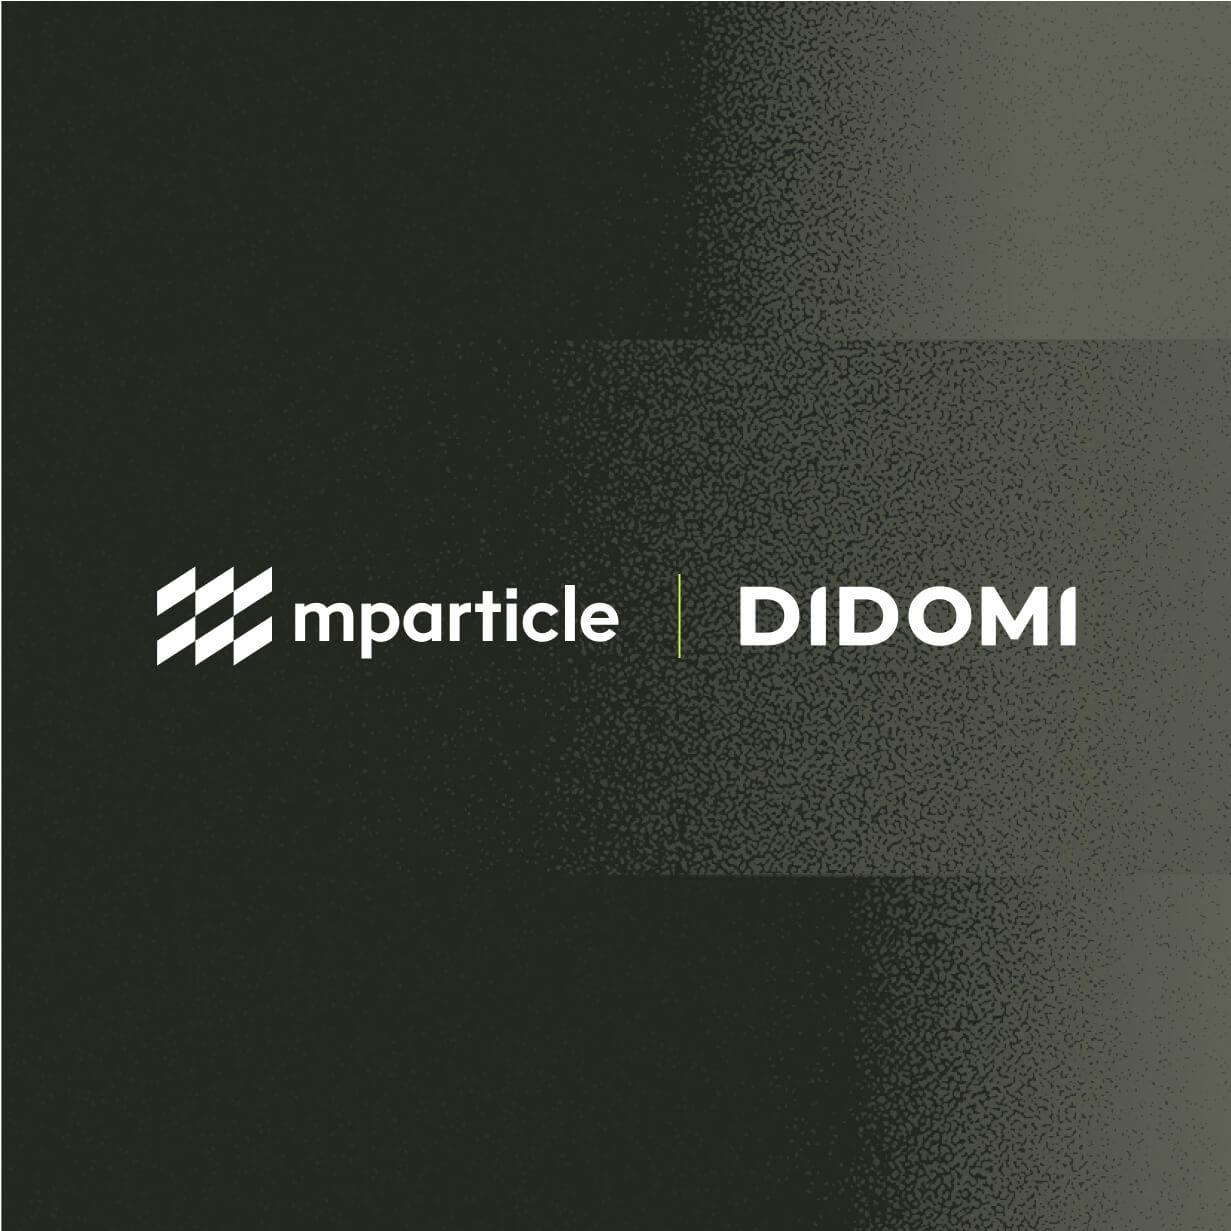 Build customer trust with the mParticle Didomi integration